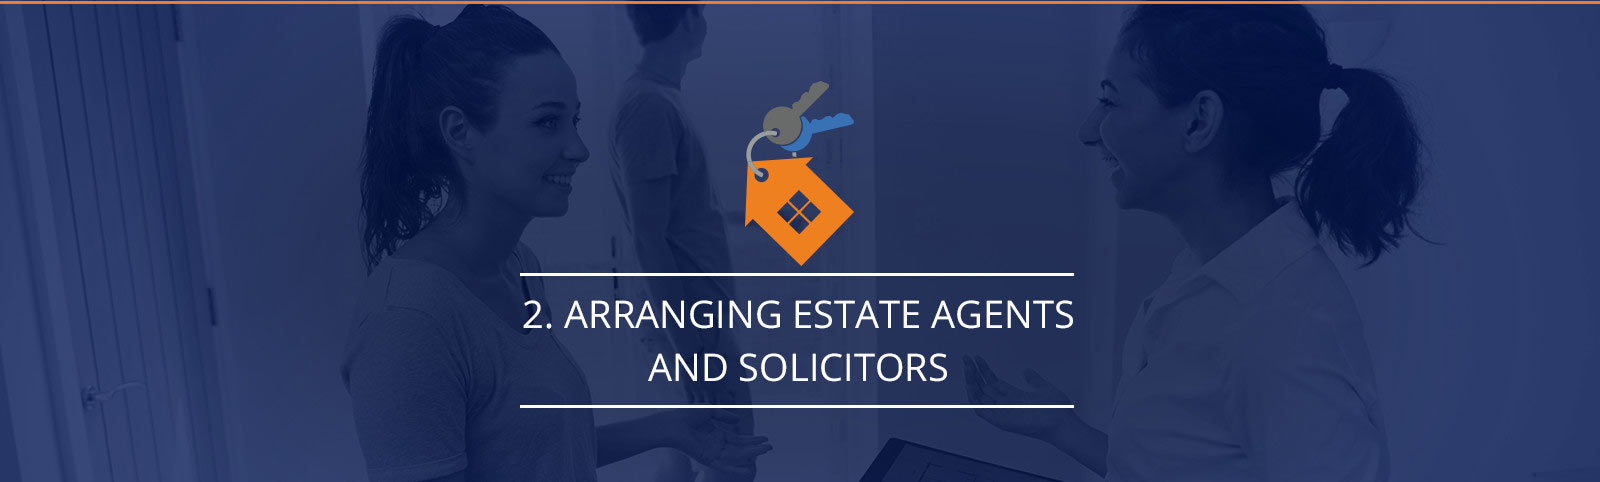 Arranging estate agents and solicitors